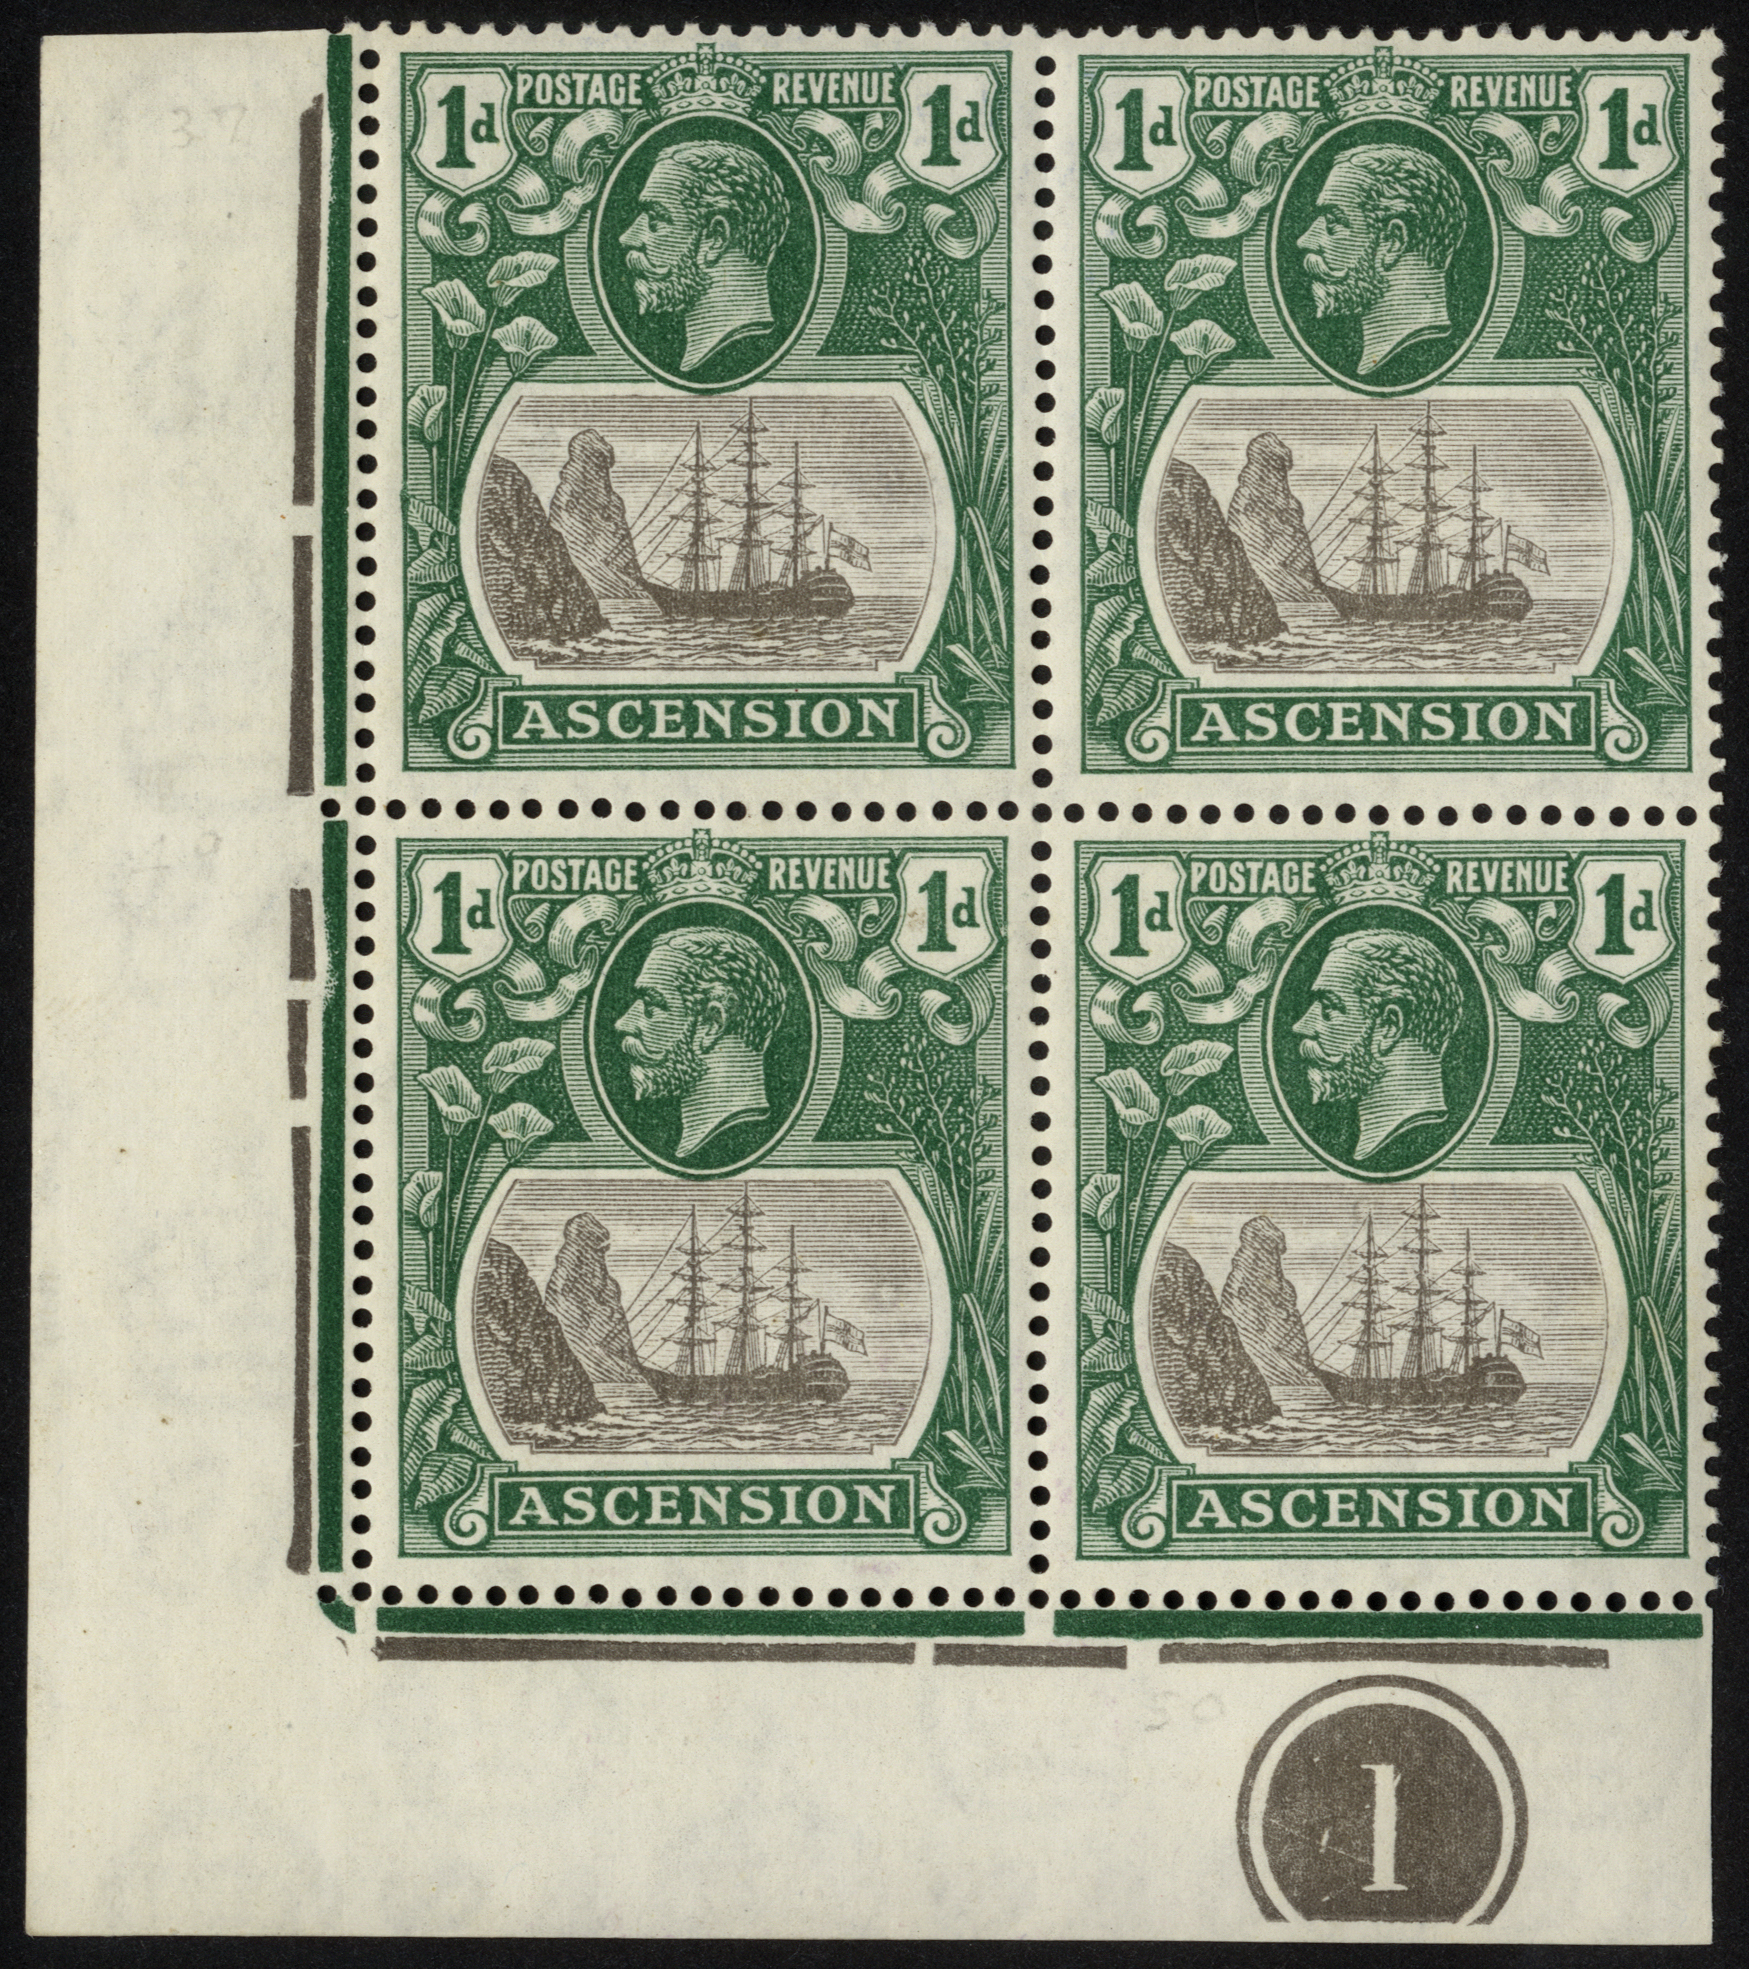 Ascension. 1933 1d grey-black and bright blue-green mint Plate block of four, R5/1 cleft rock.